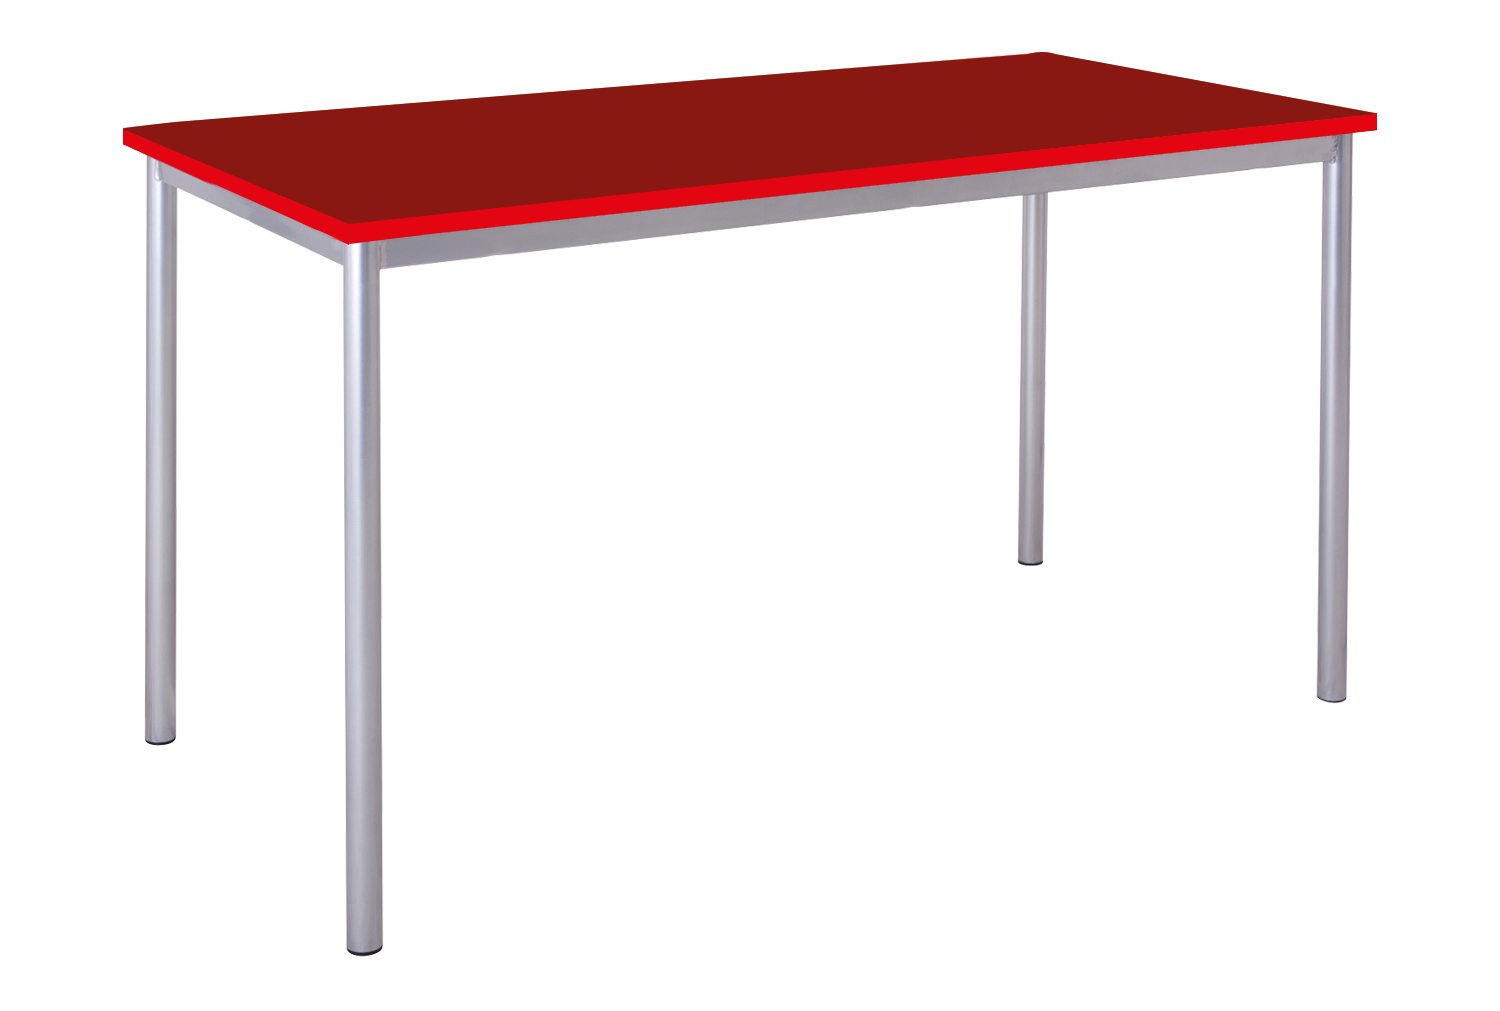 Qty 4 - Educate Premium Cylinder Leg Rectangular Classroom Table 14+ Years (PVC Edge), 150wx60dx76h (cm), Chrome Silver Frame, Red Top